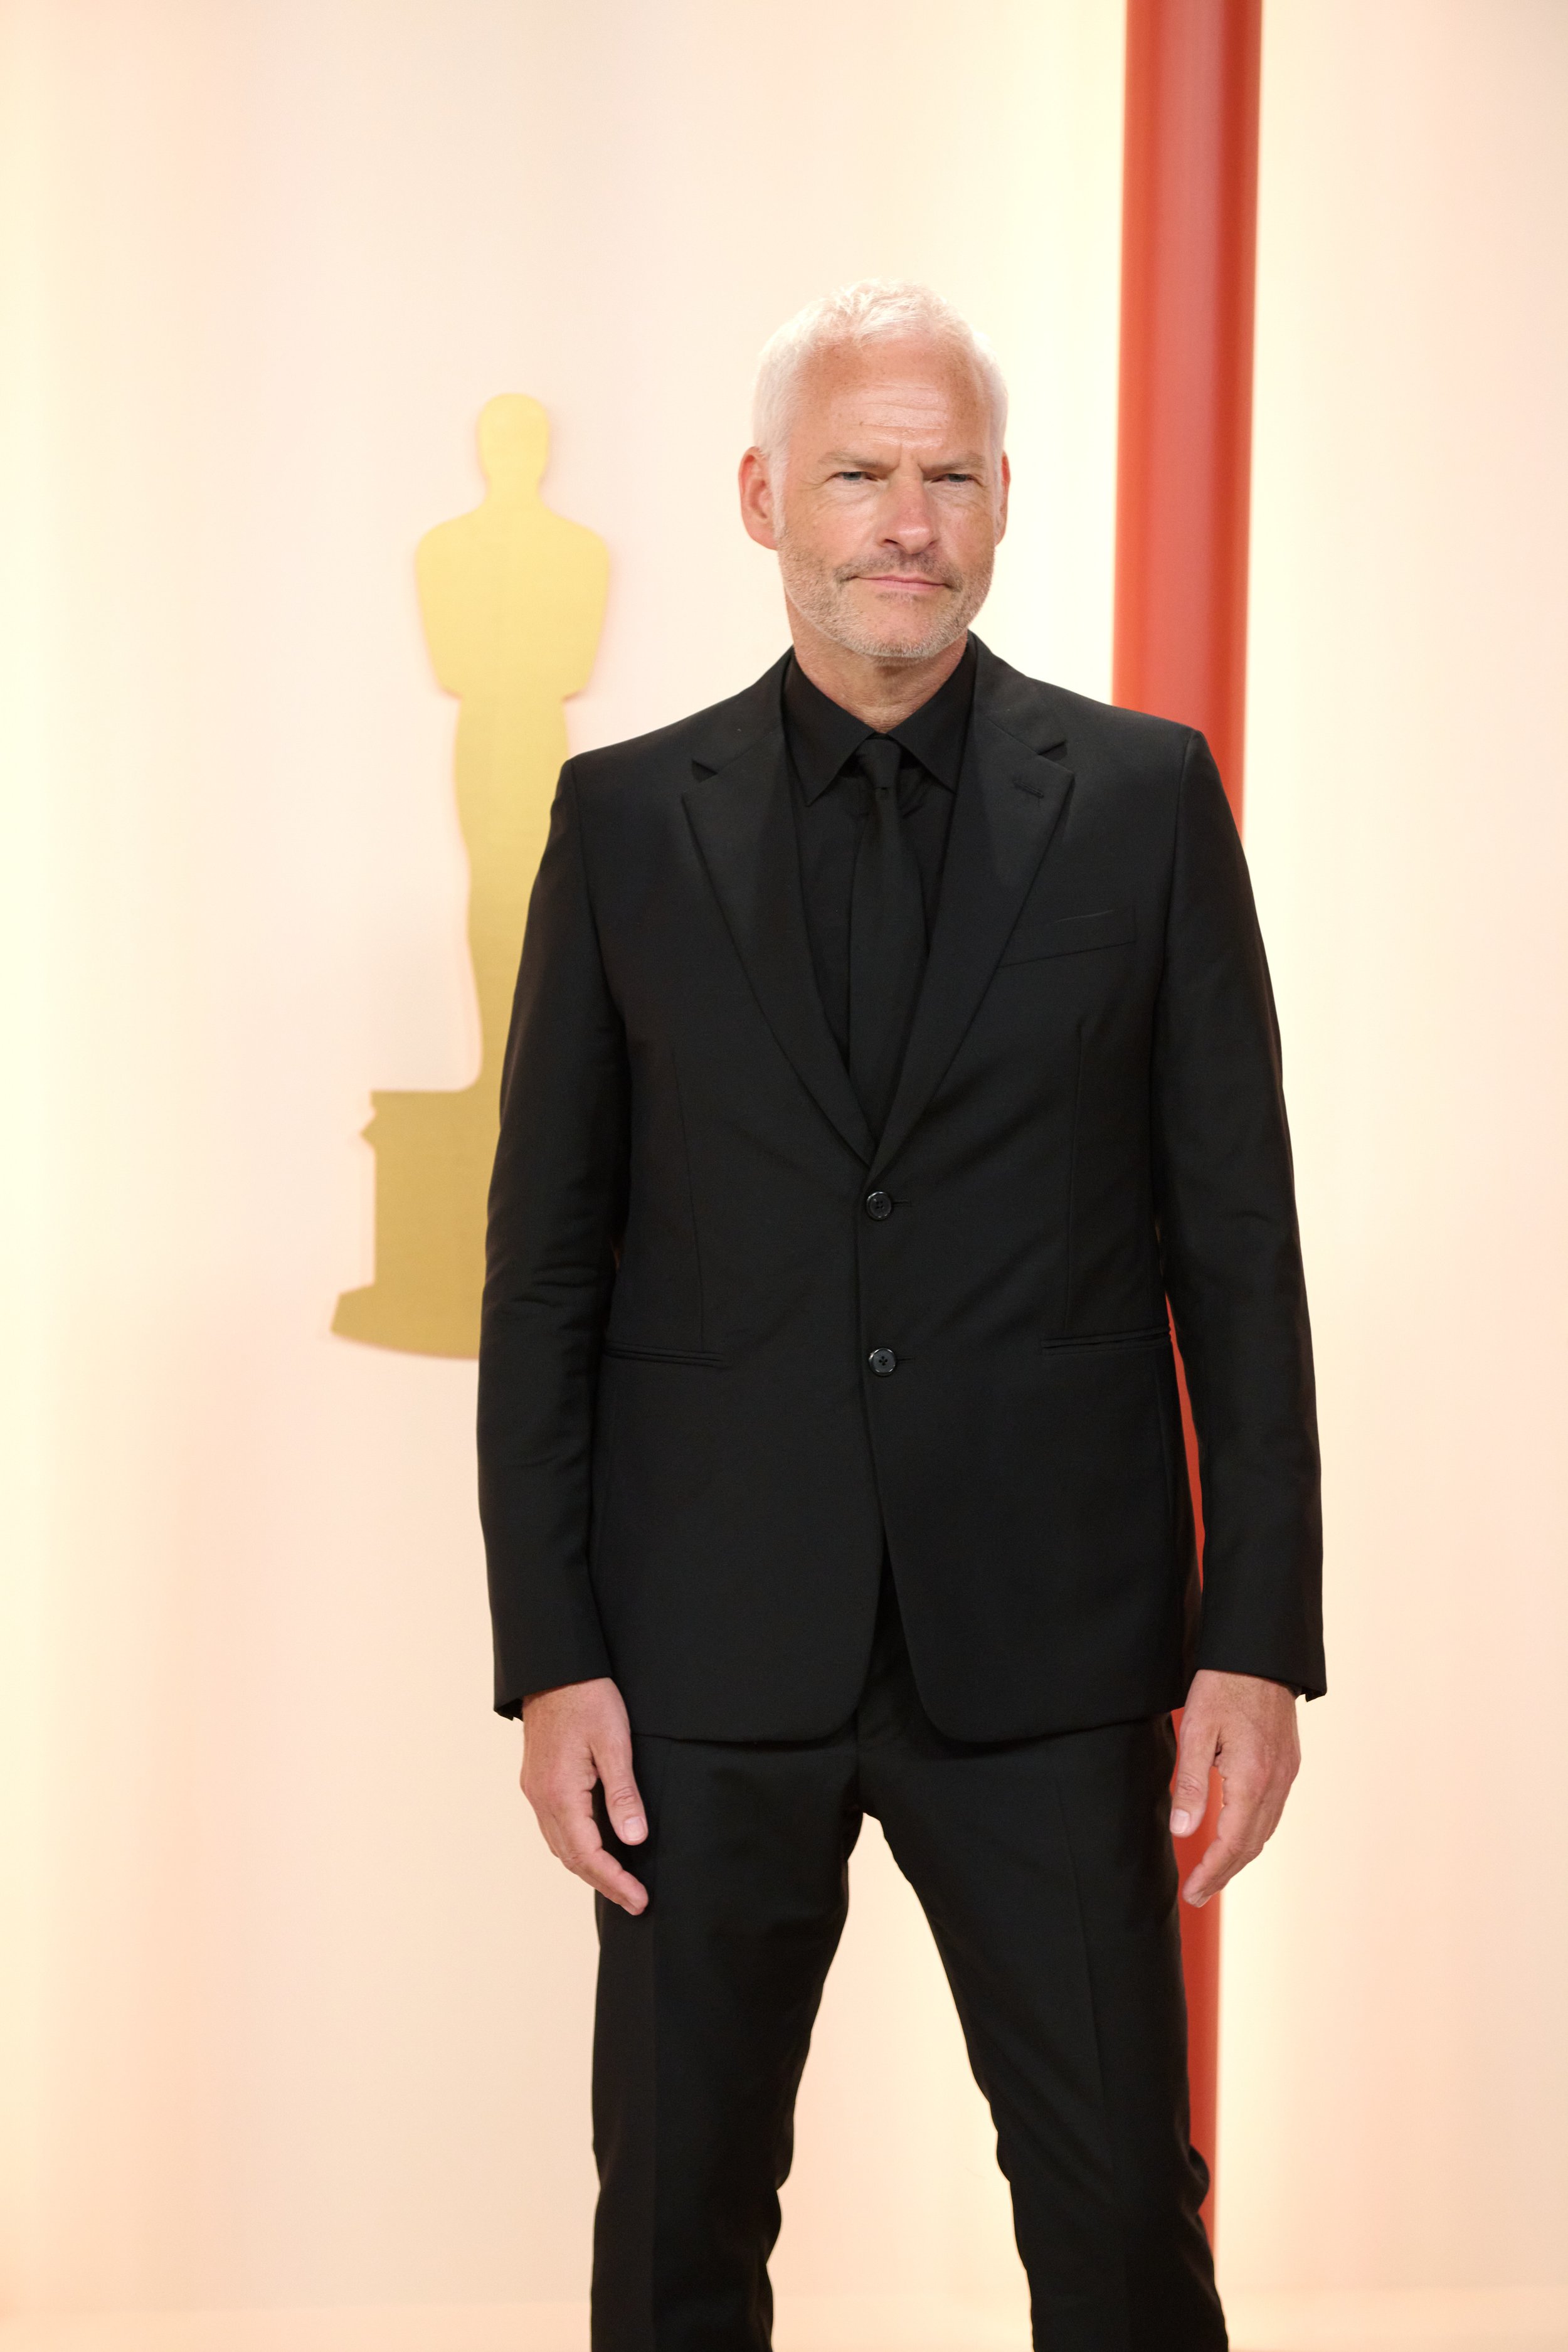 Oscar® nominee Martin McDonagh arrives on the red carpet of The 95th Oscars® at the Dolby